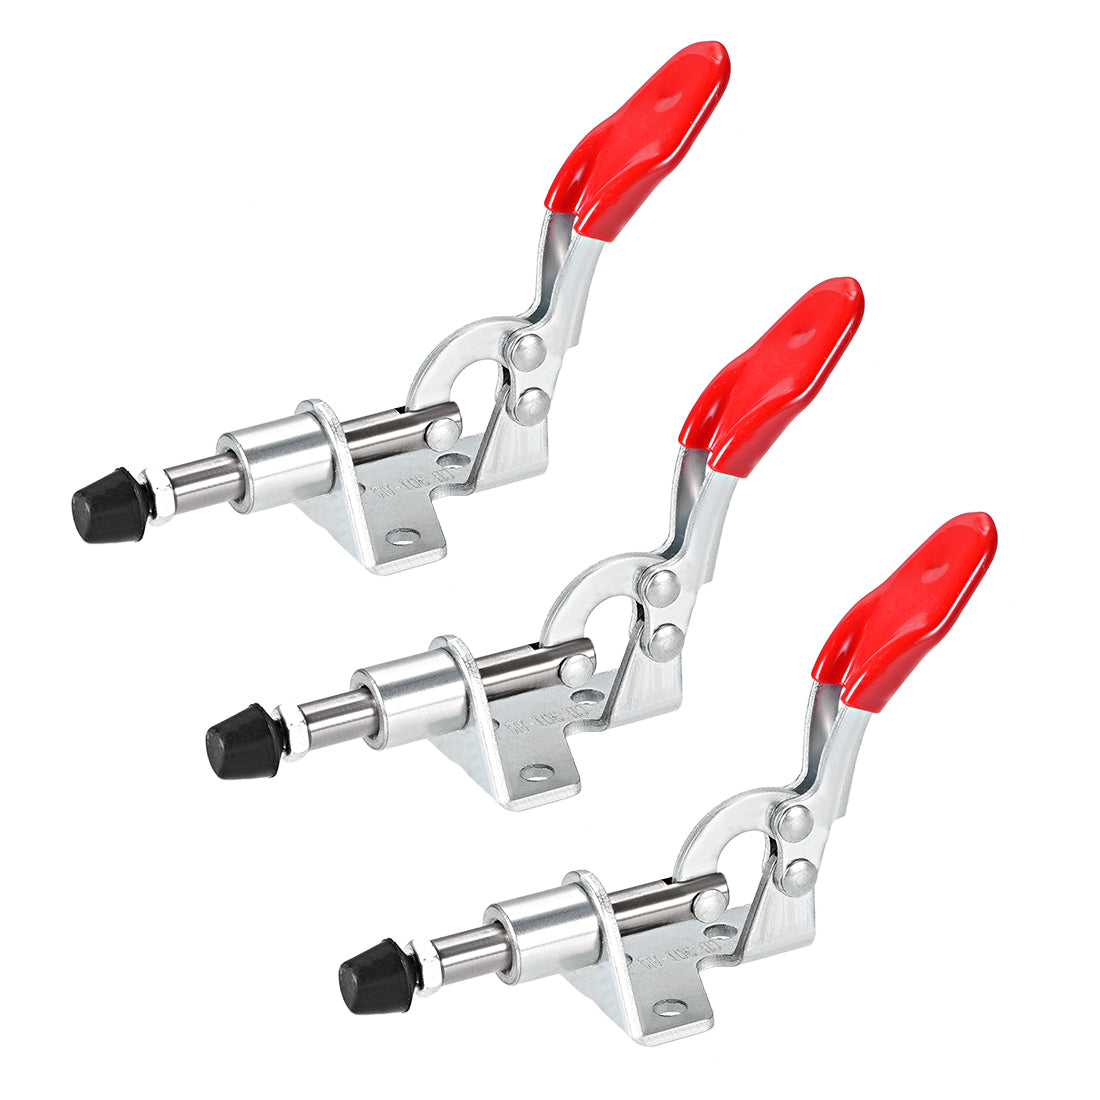 uxcell Uxcell 3 Pcs Hand Tool Pull Push Action Toggle Clamp Quick Release Clamp 100 lbs/45kg Holding Capacity 16.7mm Stroke